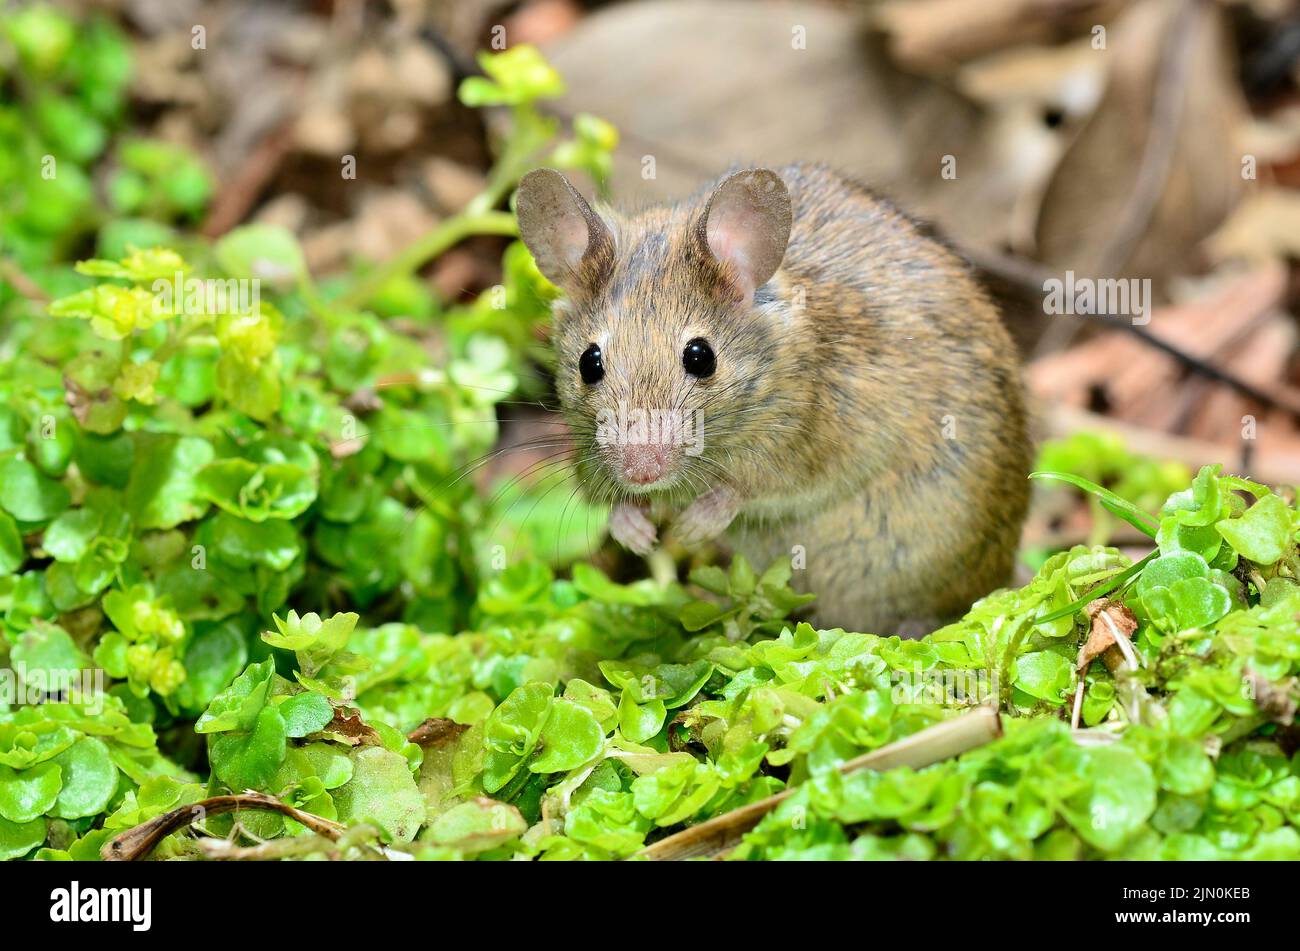 Adult house mouse foraging in leaf litter at night. Stock Photo